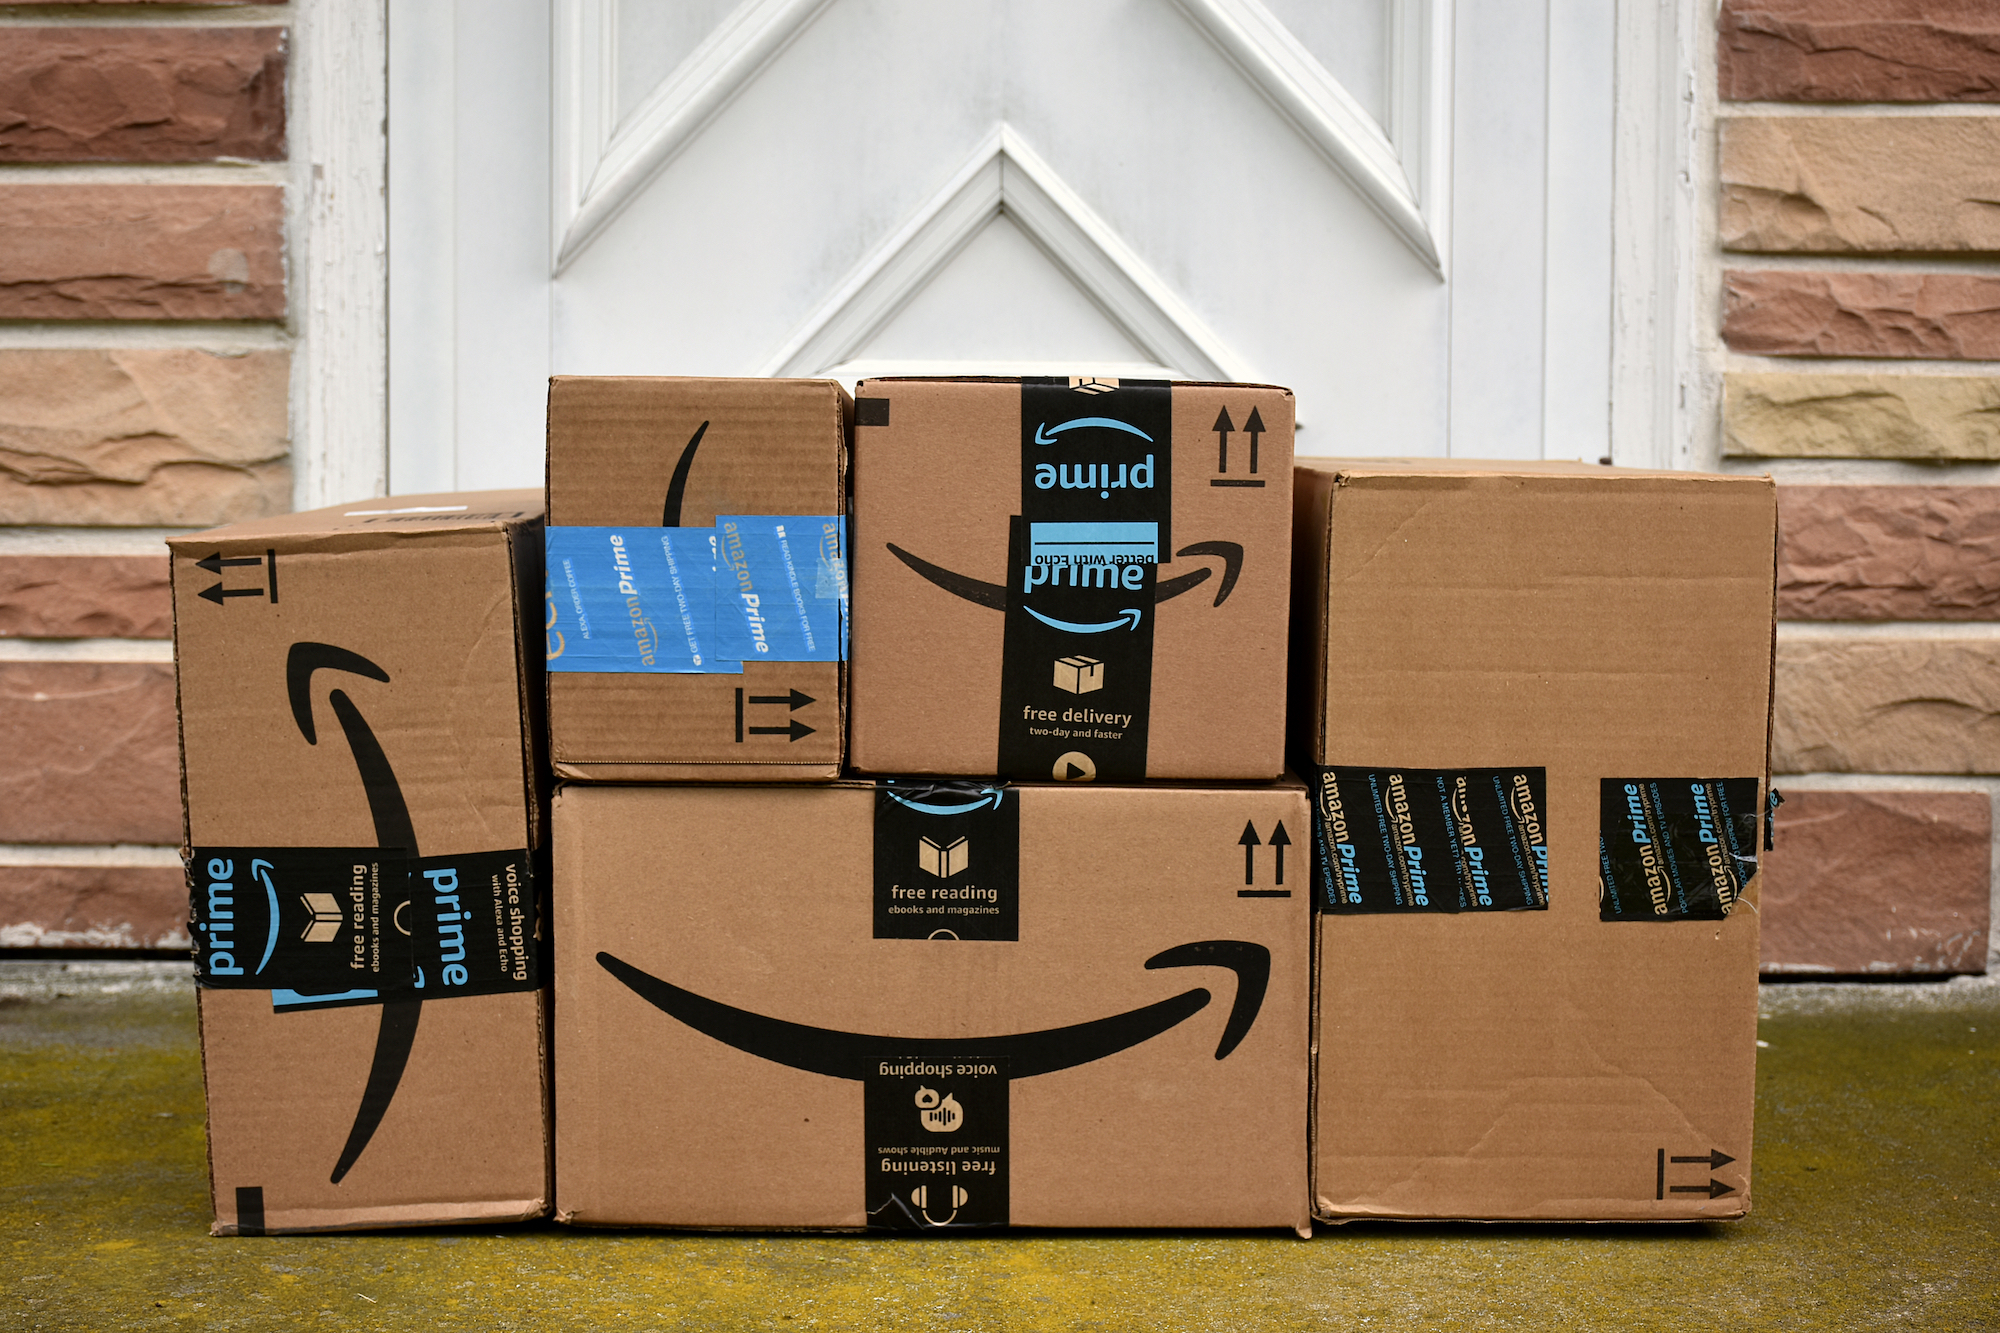 A stack of Amazon boxes is pictured.